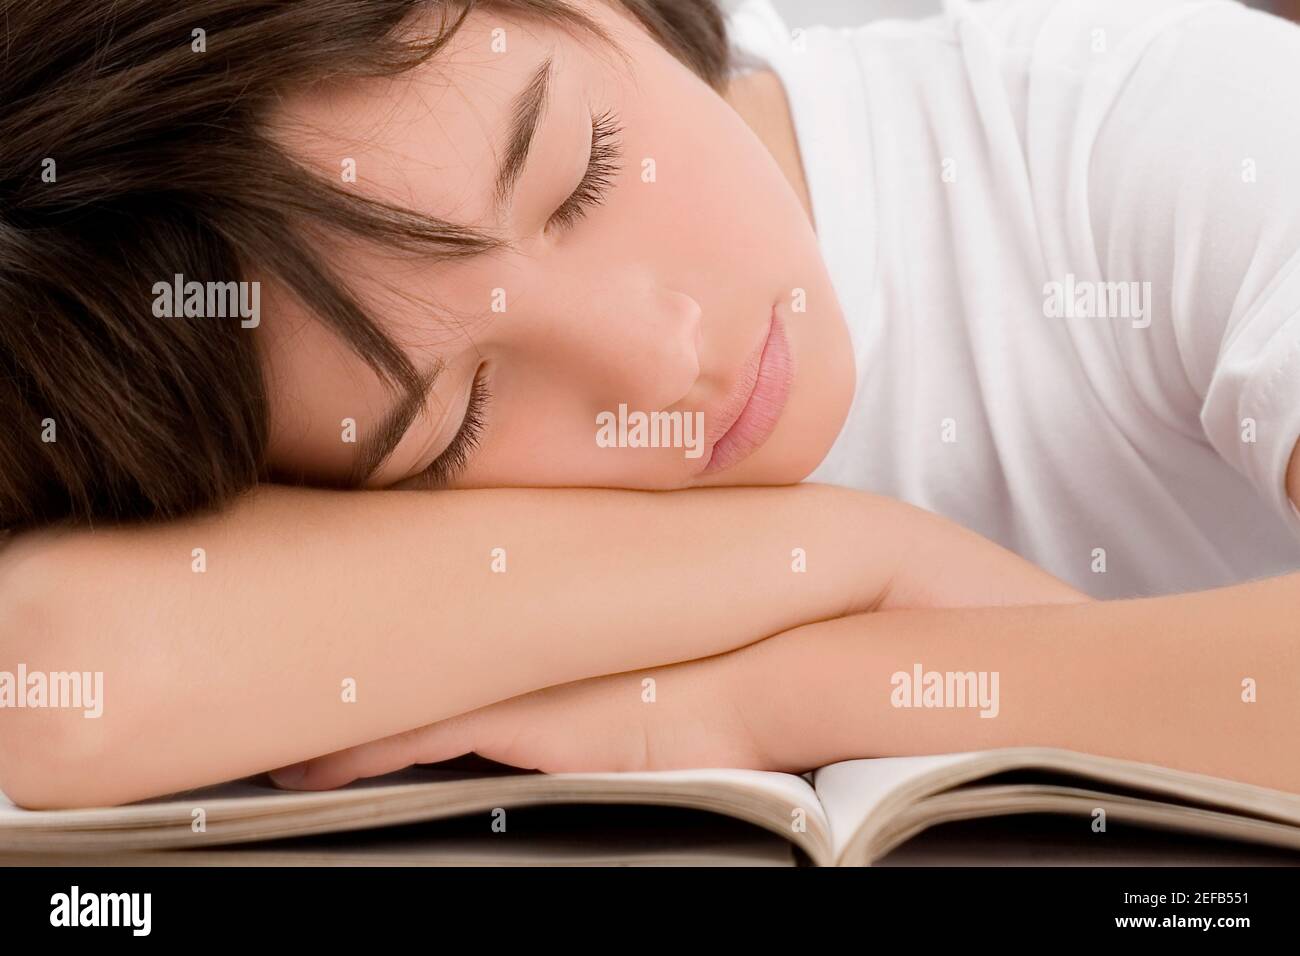 Close up of a schoolboy sleeping Stock Photo